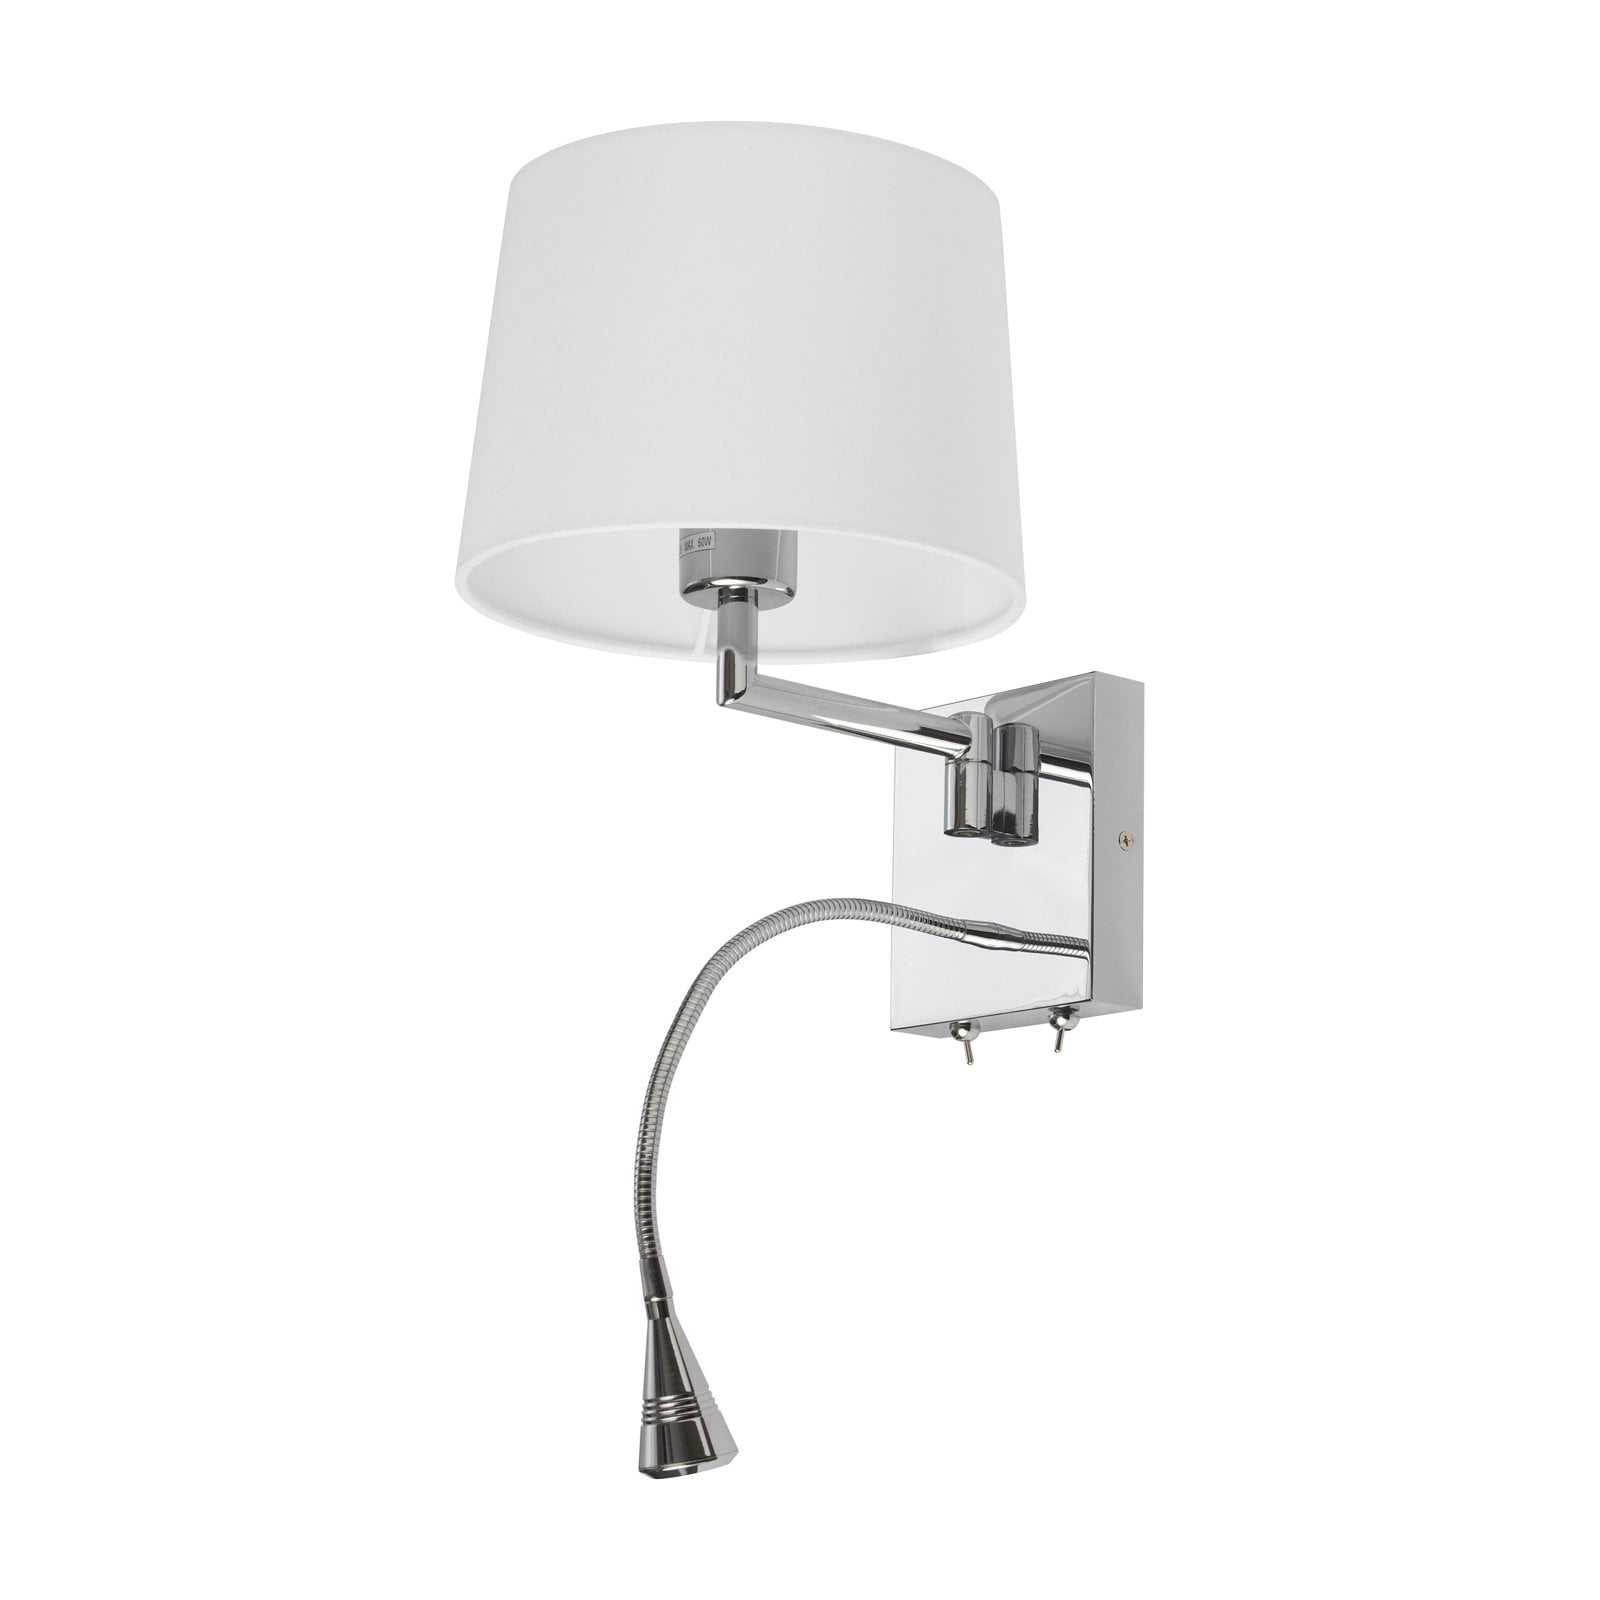 Dled426a Wall Sconce With Led Reading Lamp, Polished Chrome - 12 X 8.5 X 8.5 In.